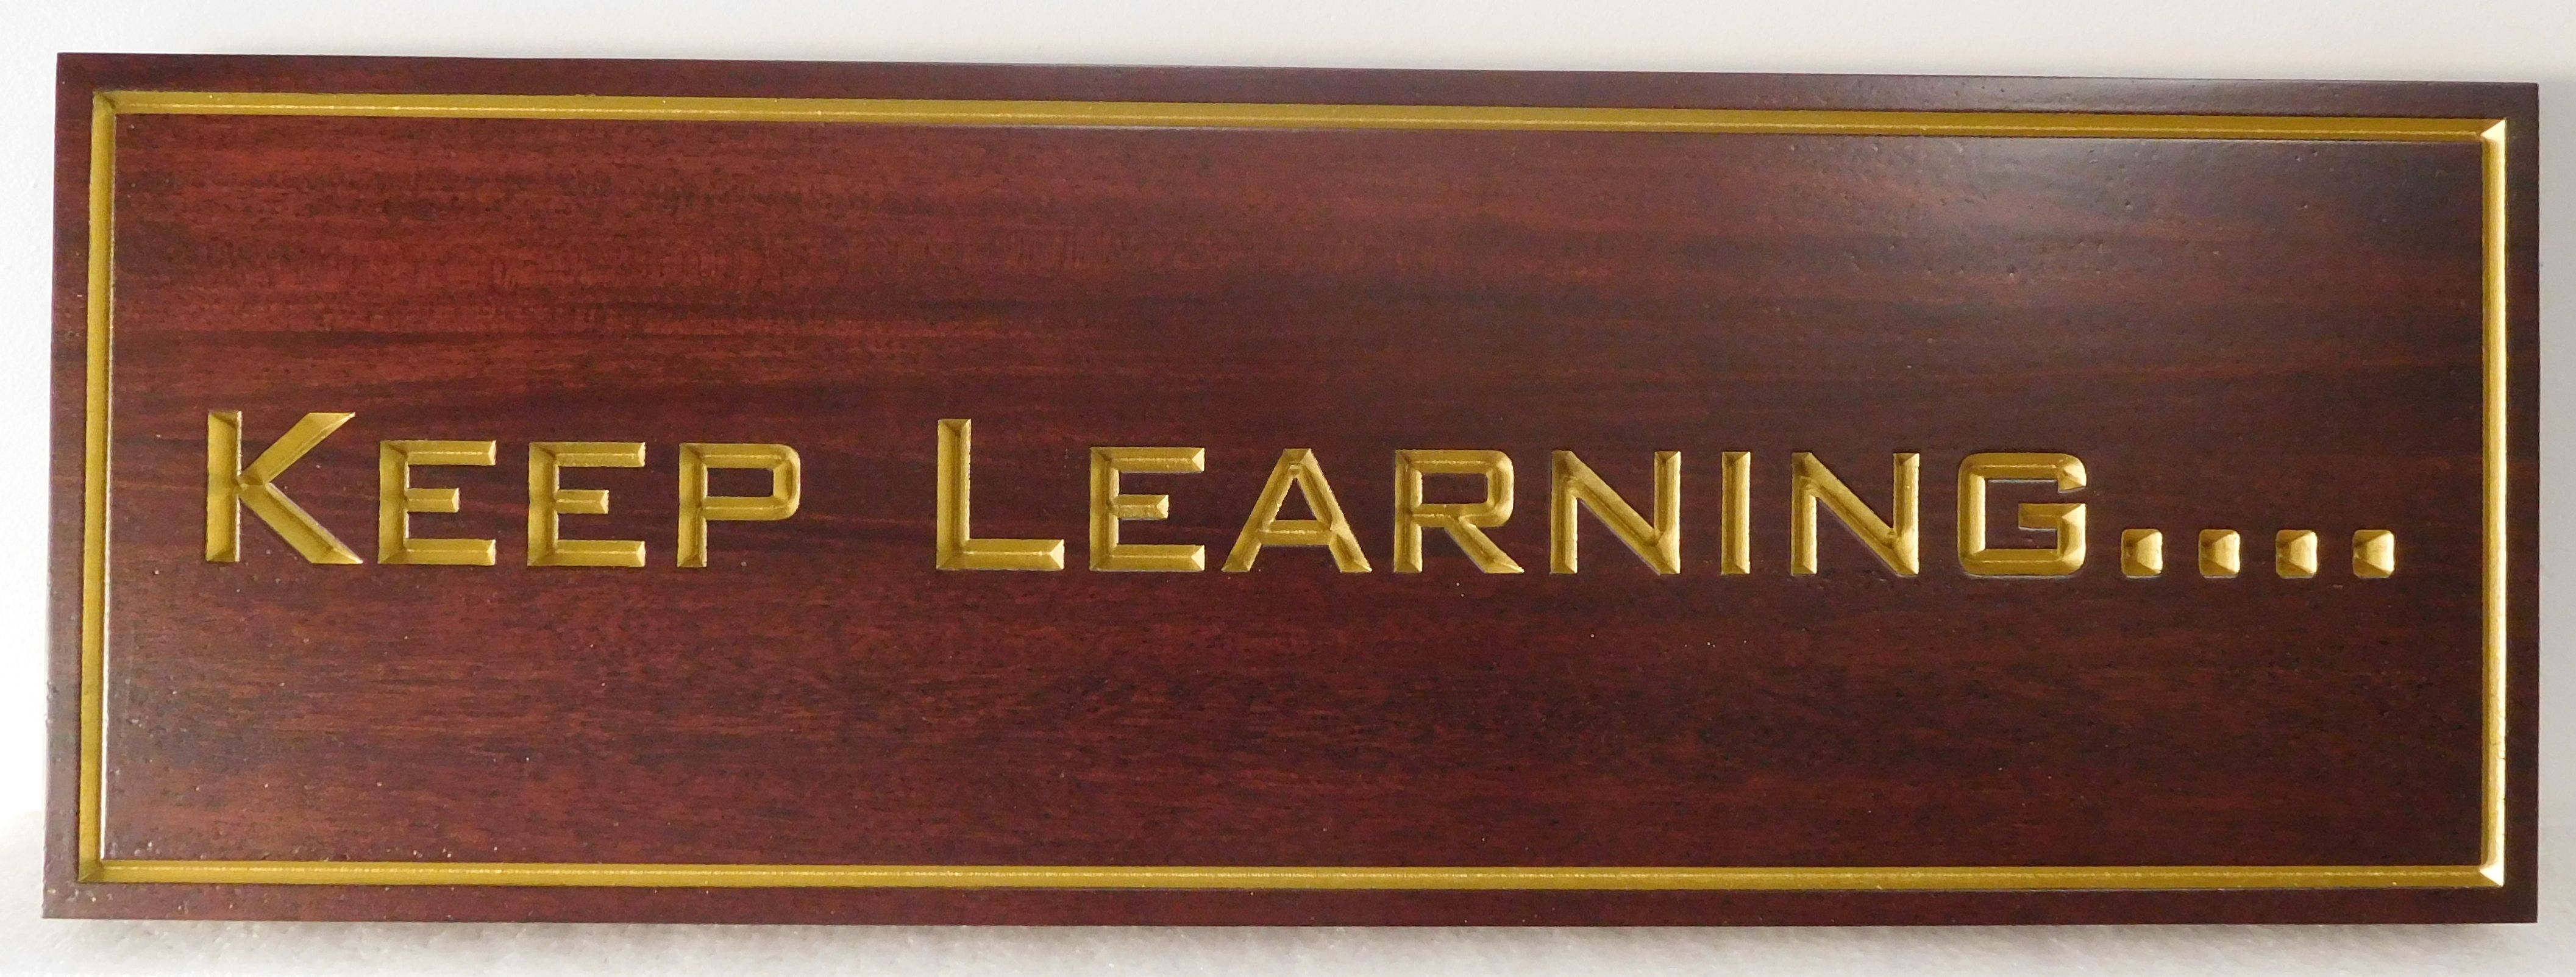 Y34845 - Engraved (V-carved) African Mahogany Wall Plaque with saying "Keep Learning.." ,Gilded with 24K Gold Leaf